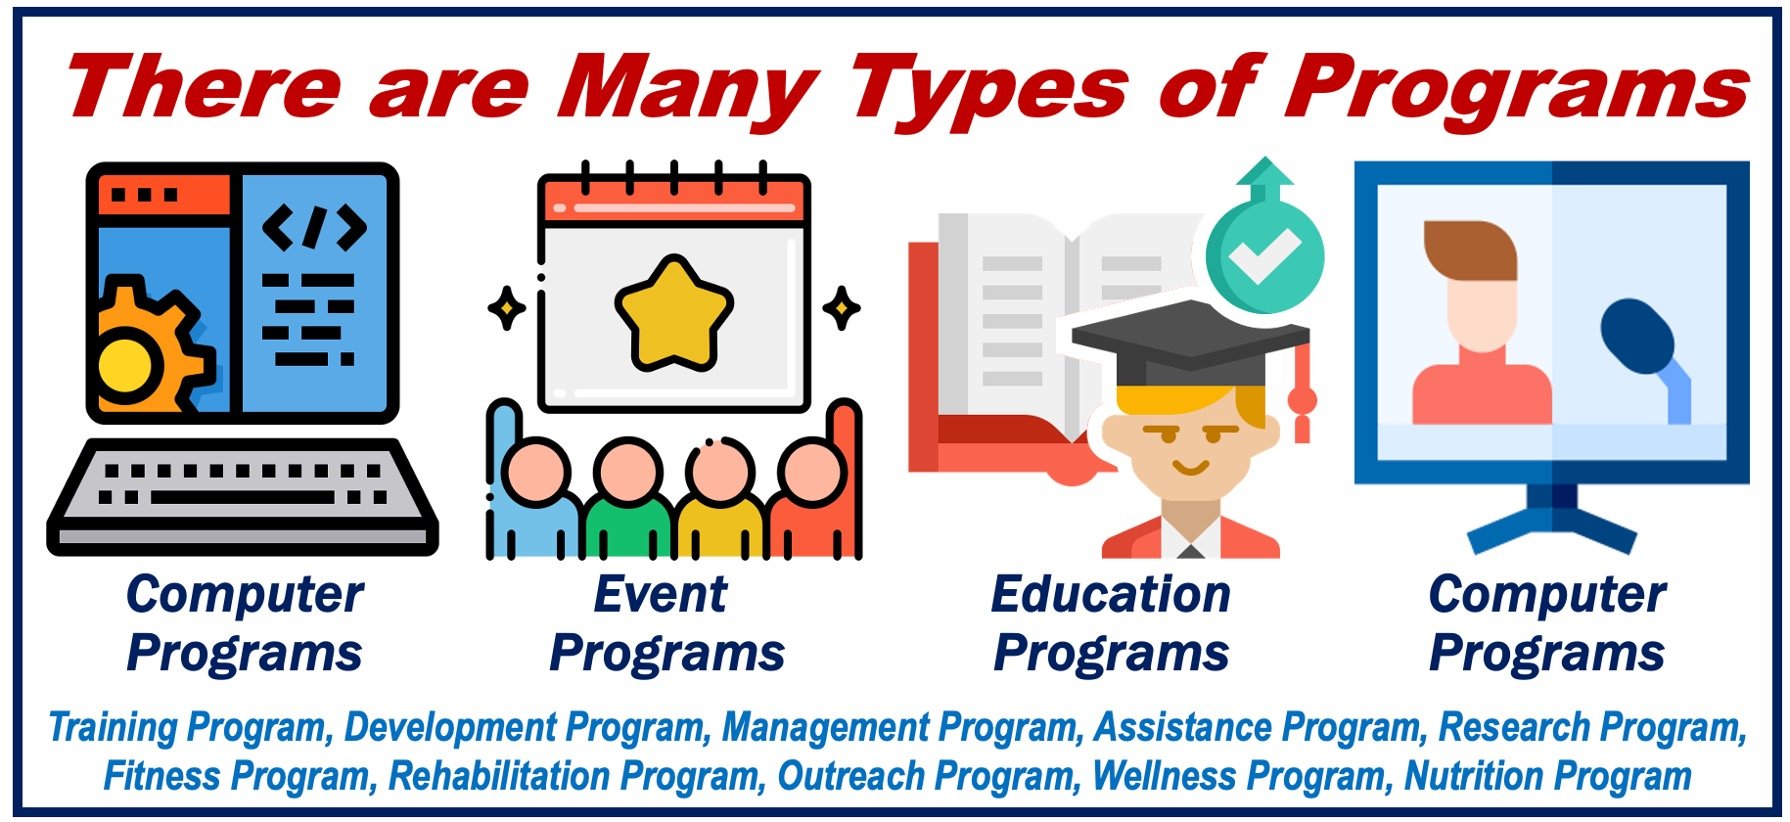 Image showing various types of programs